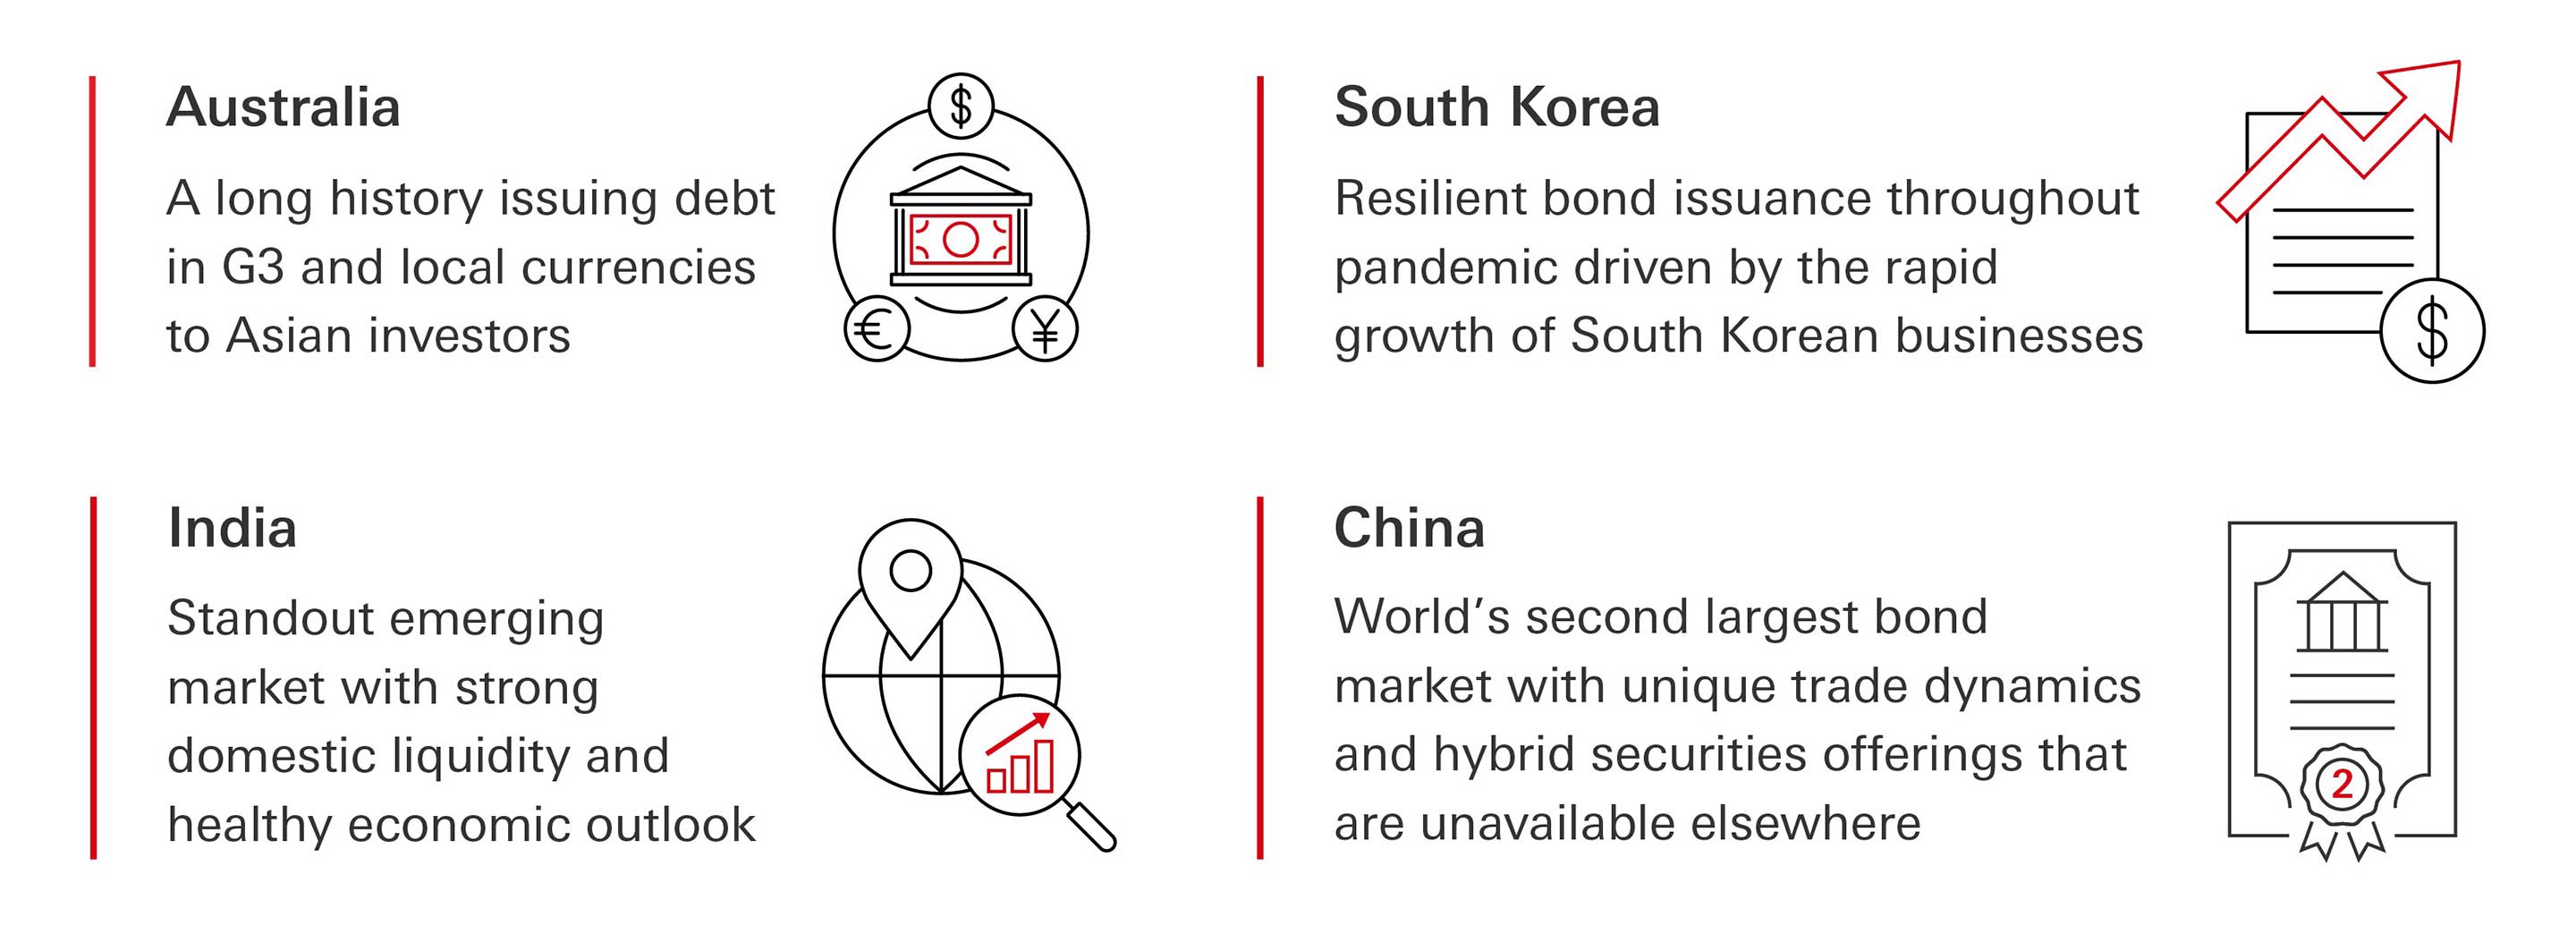 Asia's diverse bond markets present unique opportunities for both investors and issuers